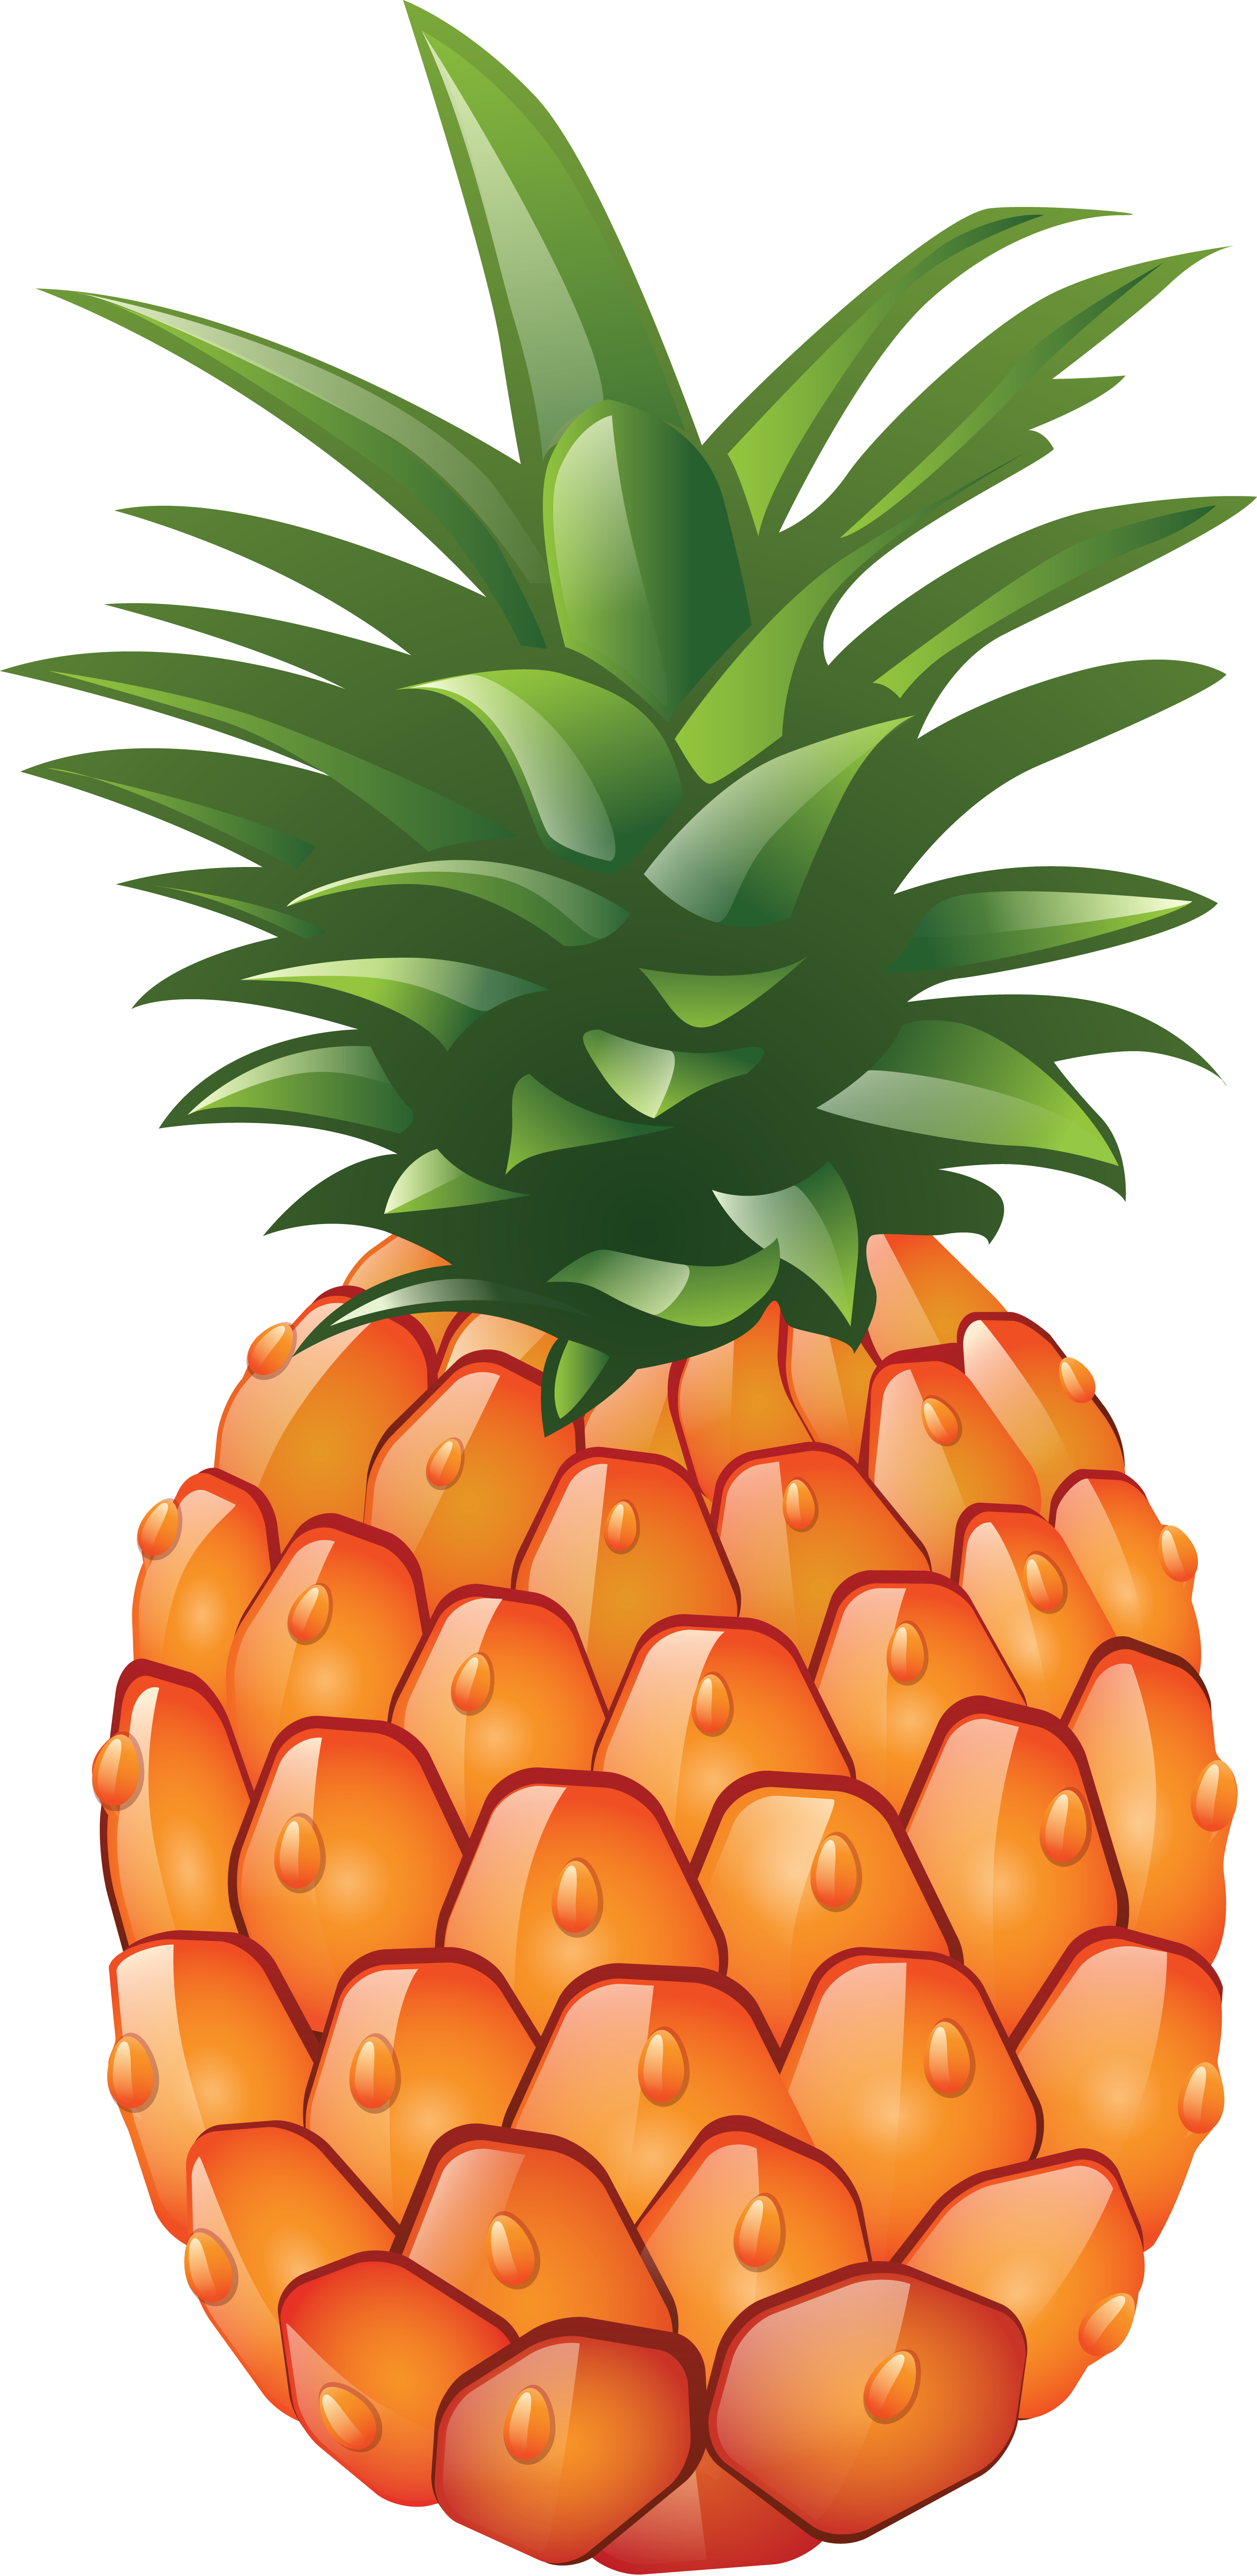 Pineapple png image free. Guitar clipart tropical